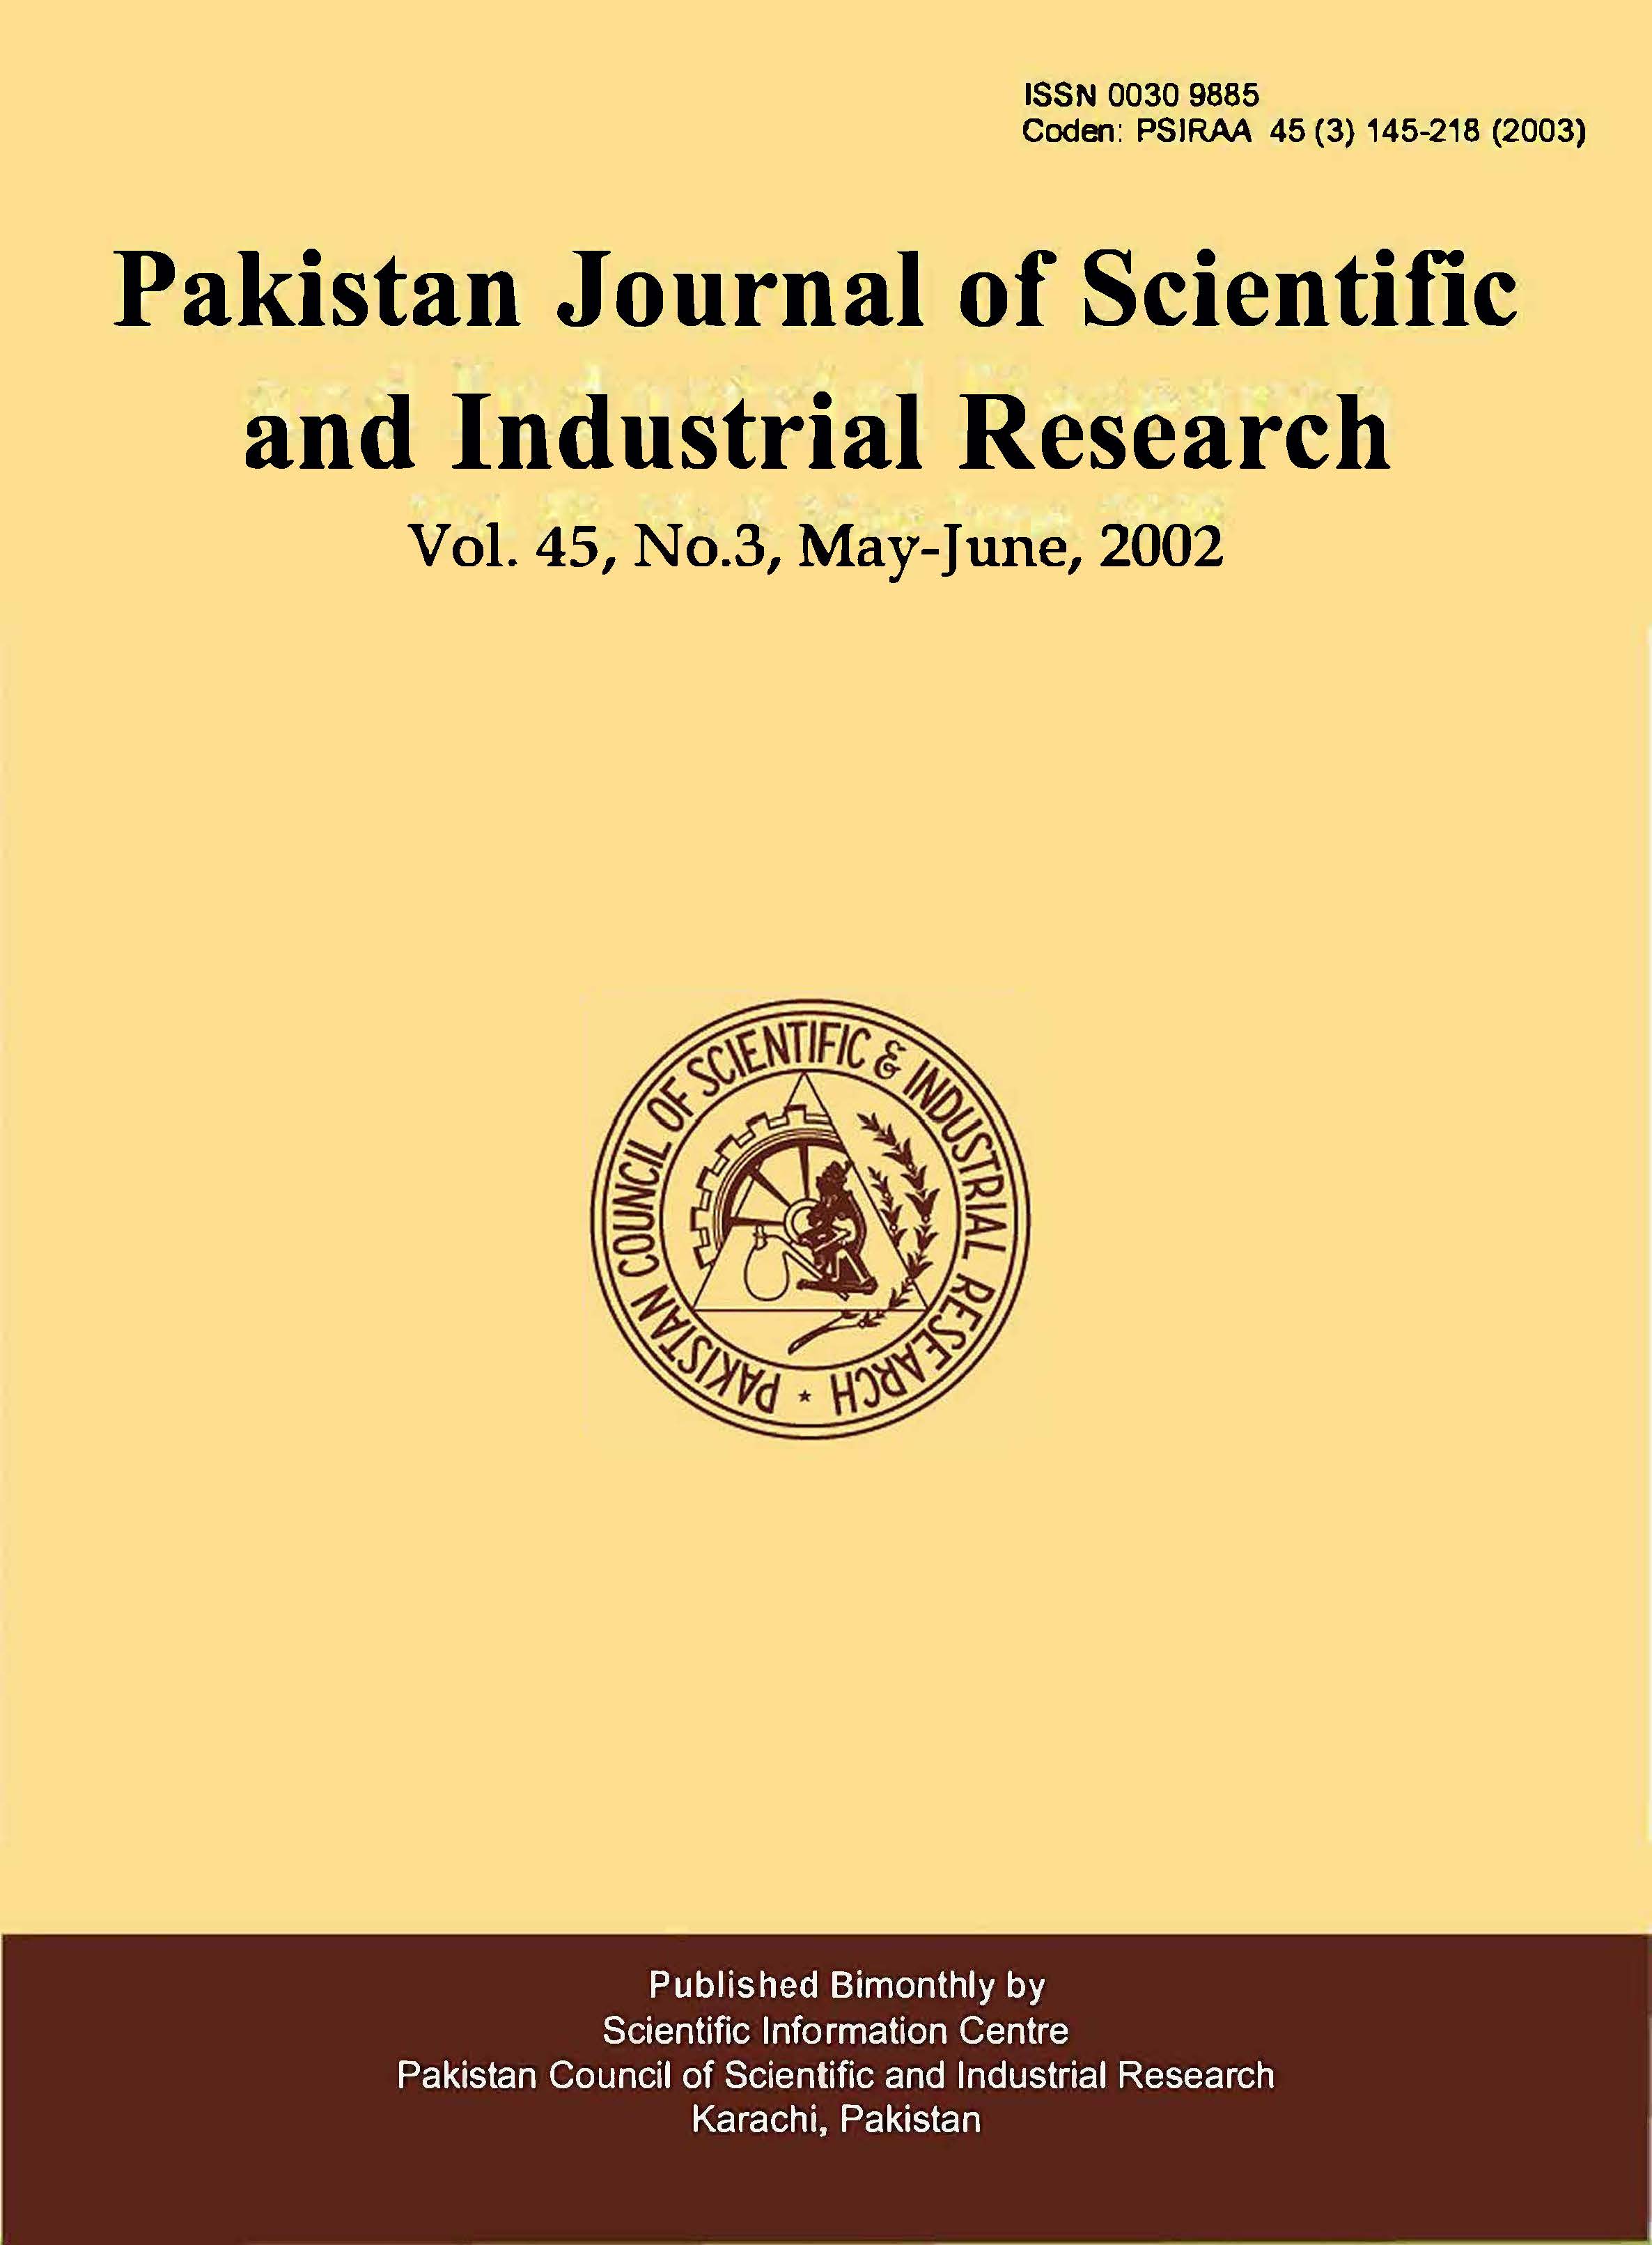 					View Vol. 45 No. 3 (2002): Pakistan Journal of Scientific and Industrial Research
				